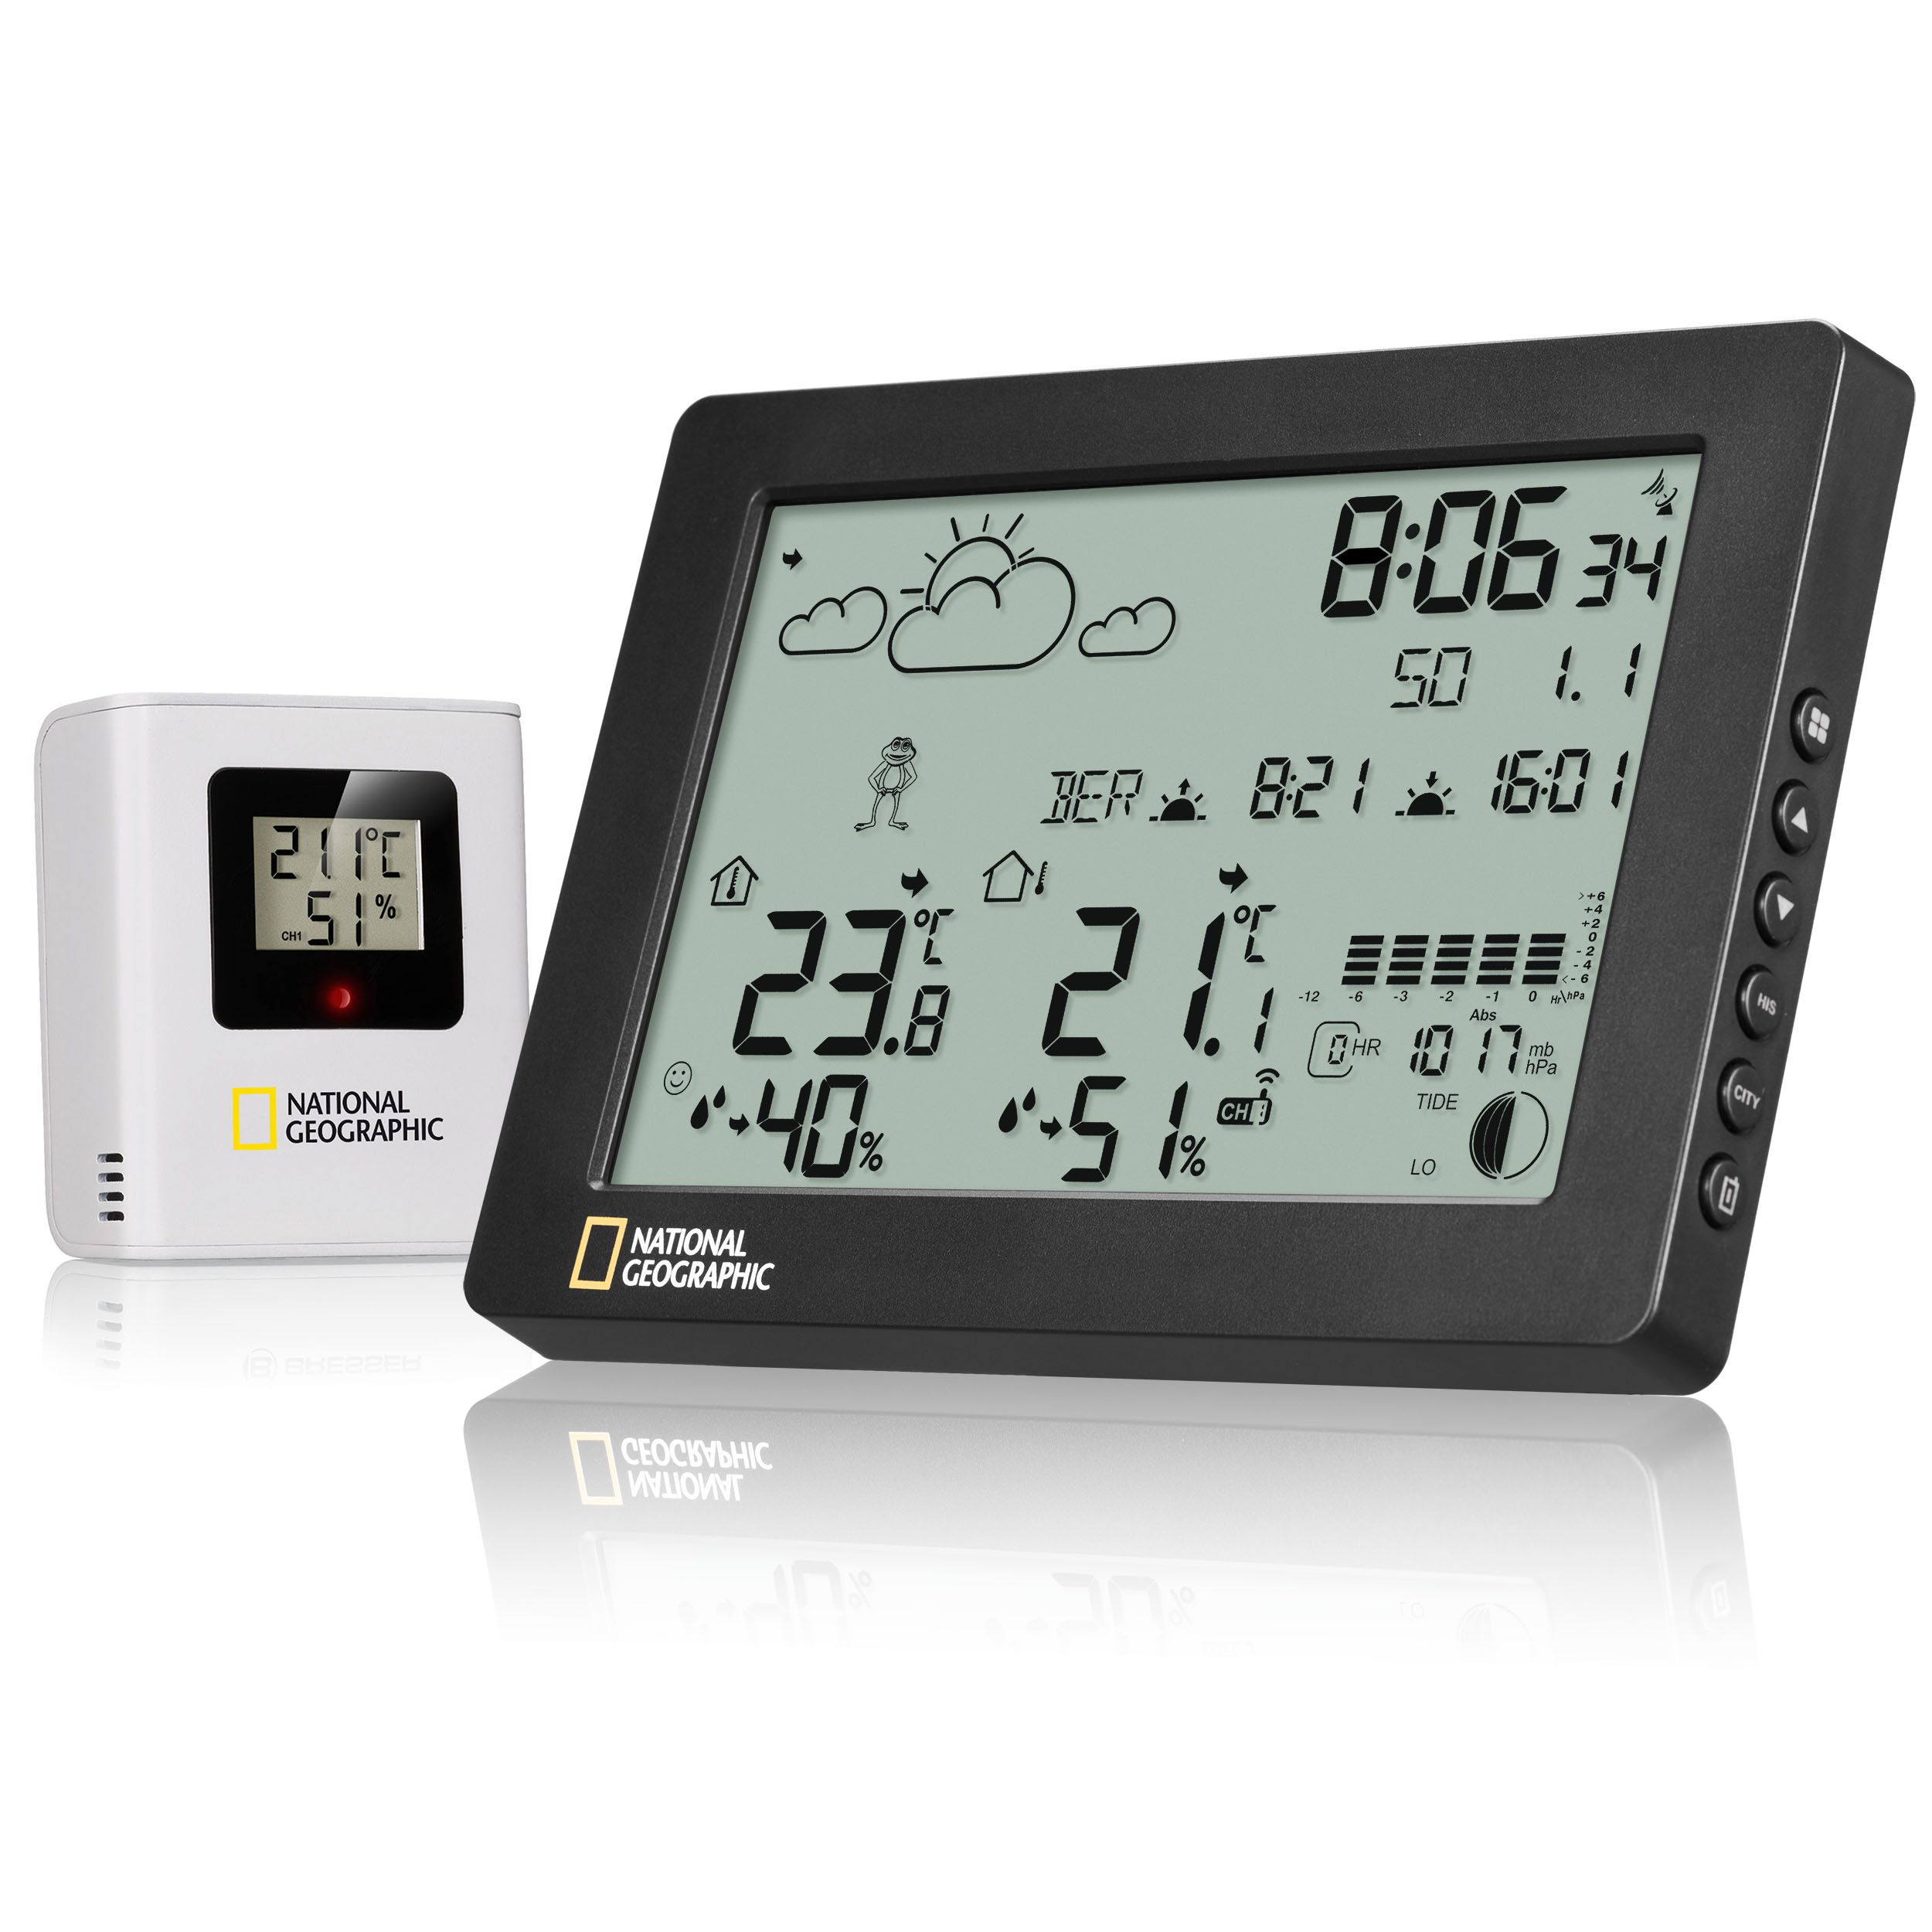 NATIONAL GEOGRAPHIC BaroTemp HZ Weather Station